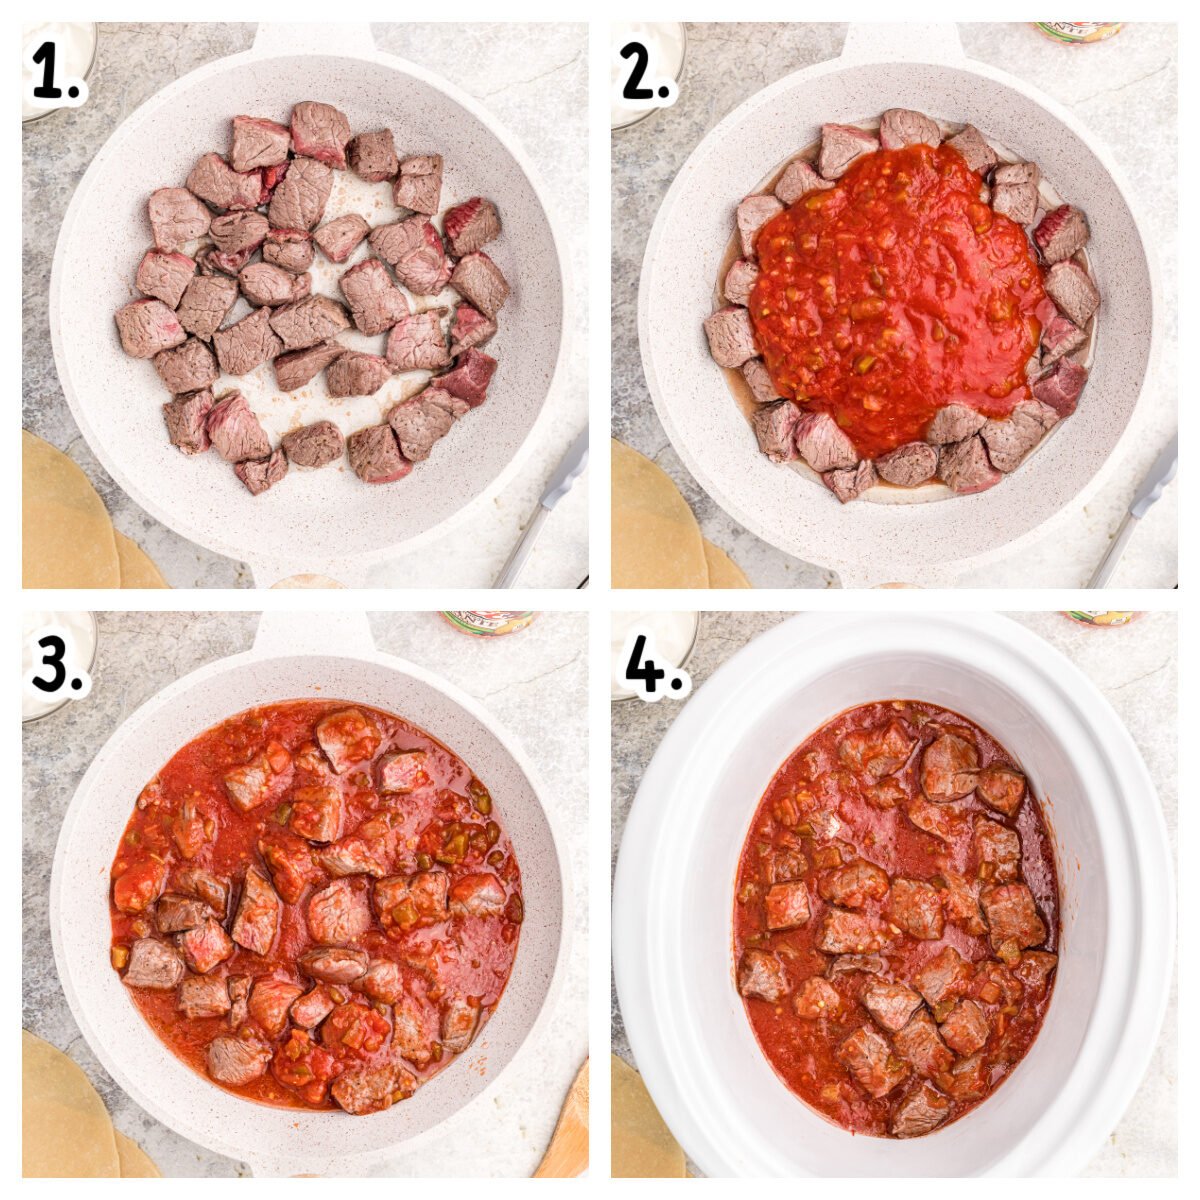 4 images about how to make steak burritos in crockpot.